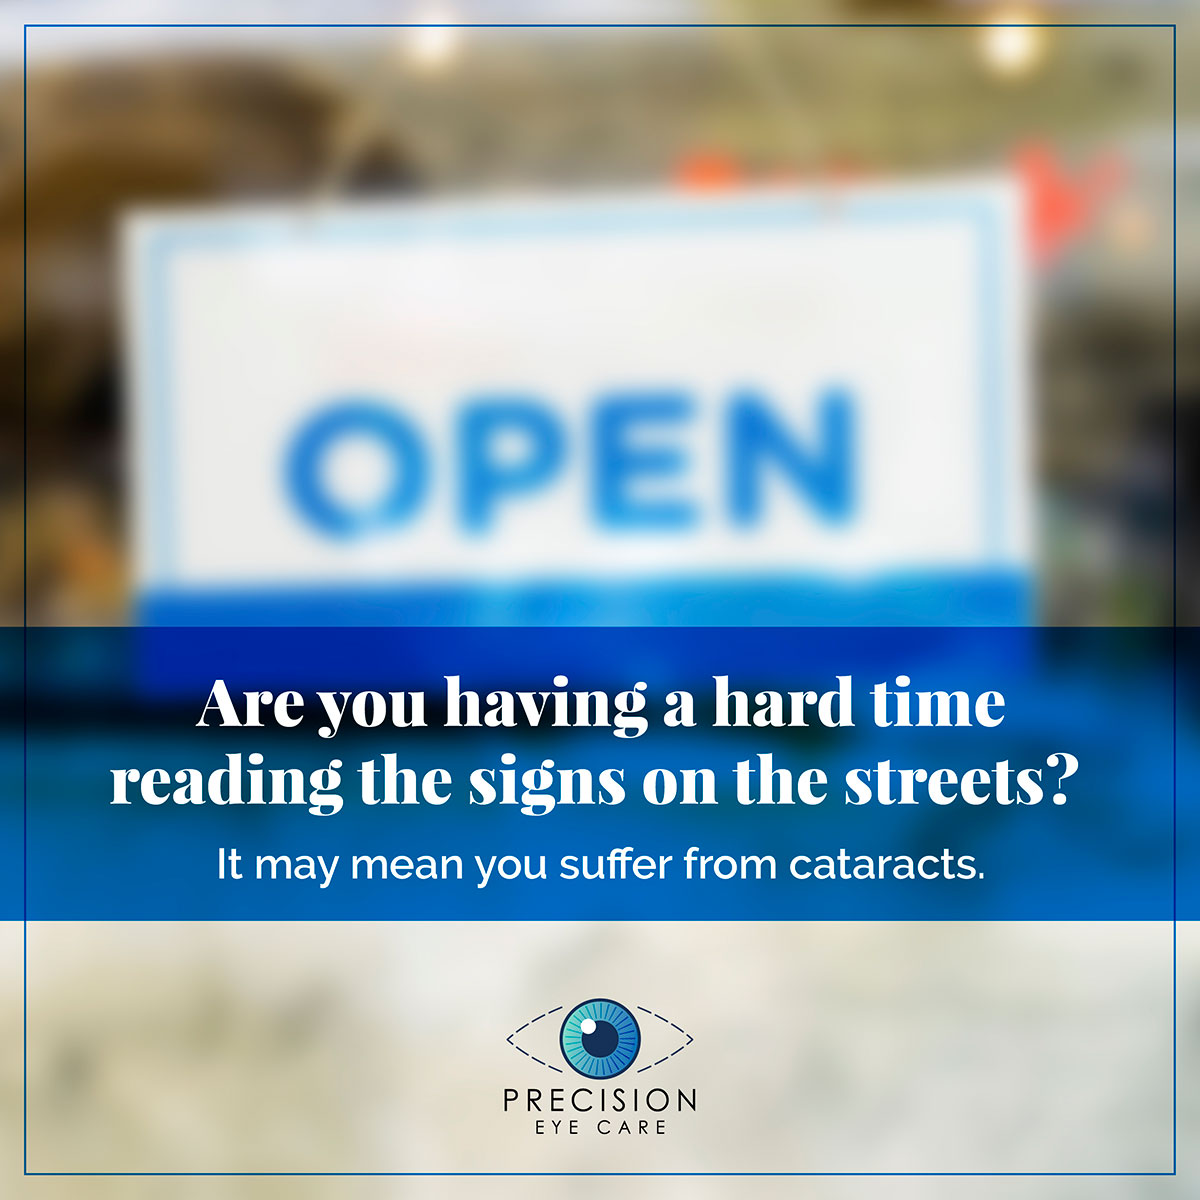 Are you having a hard time reading the signs on the streets?